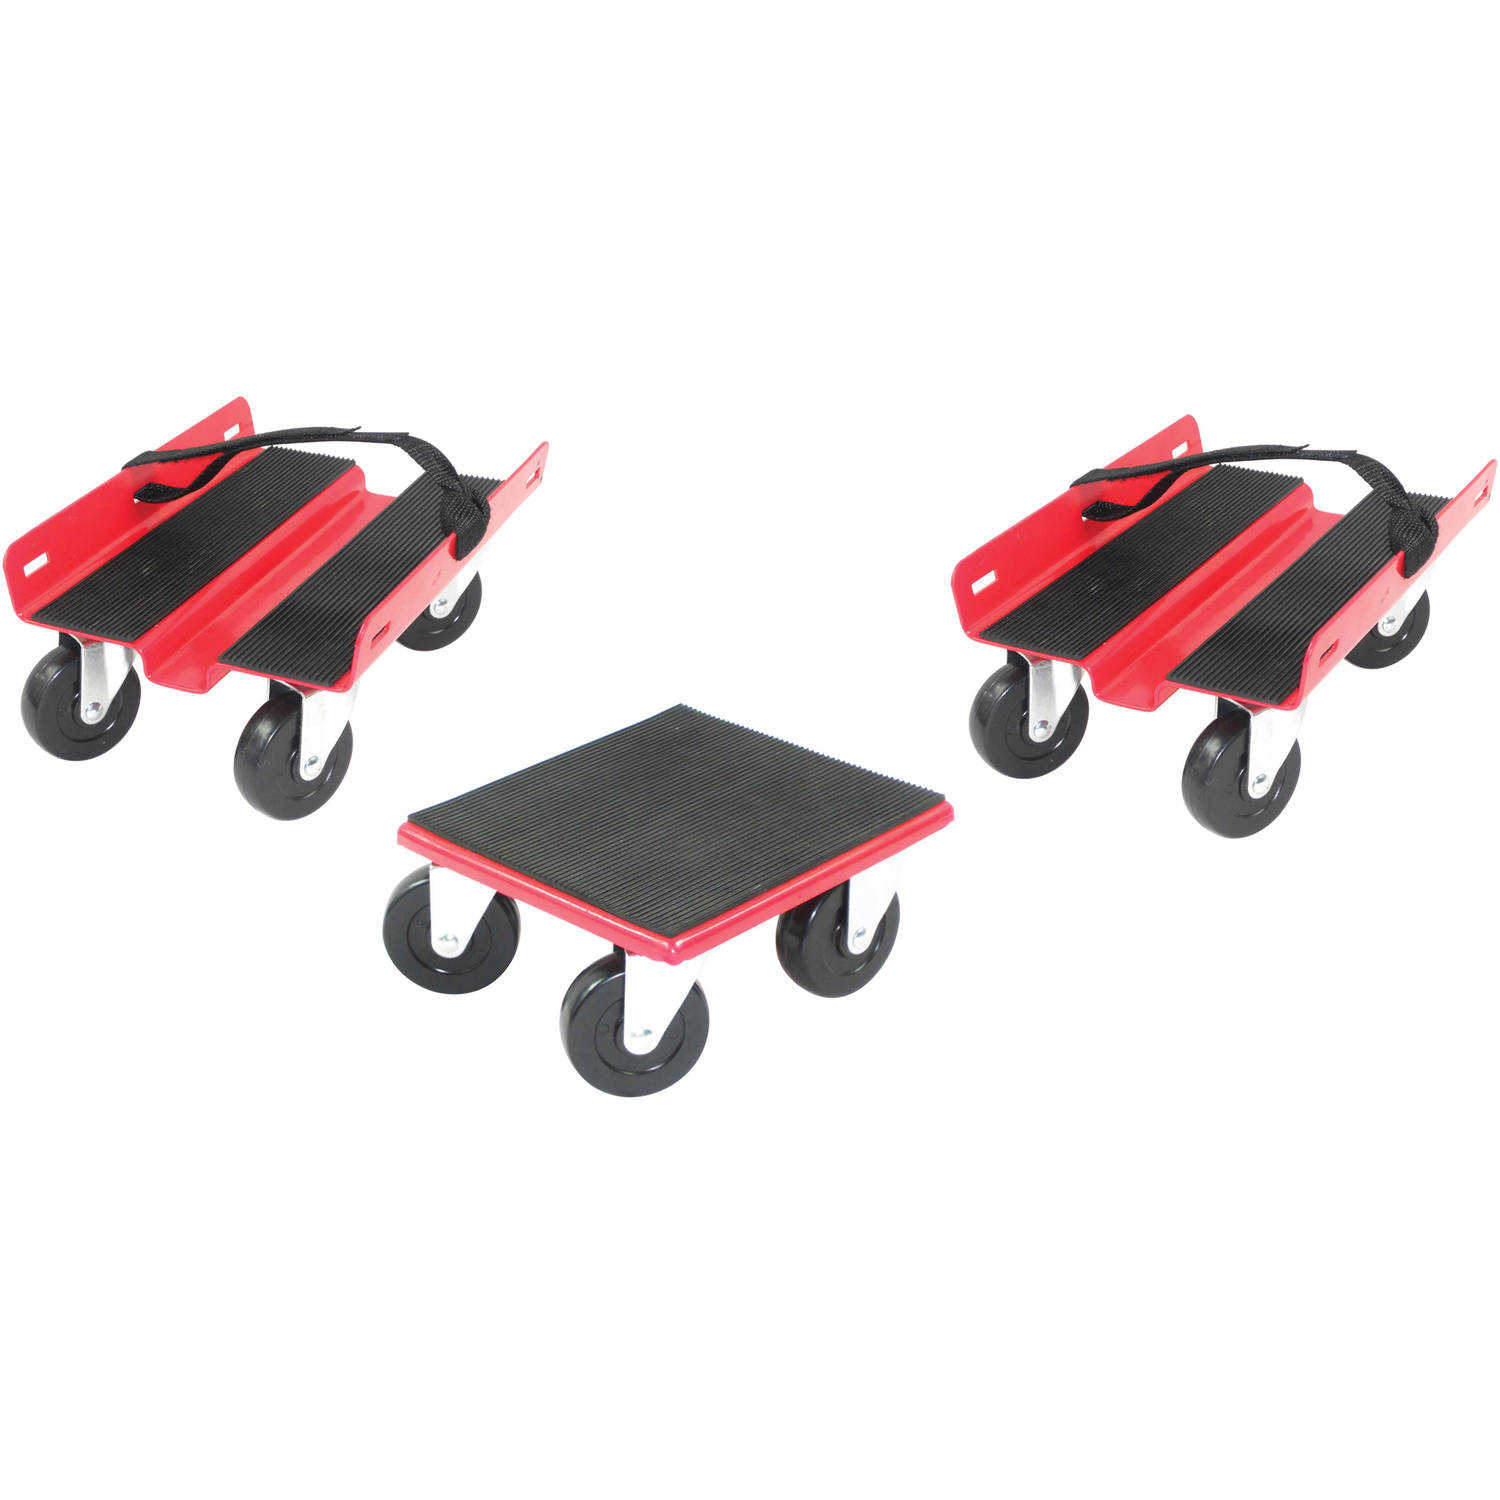 Extreme Max Economy Snowmobile Dolly System